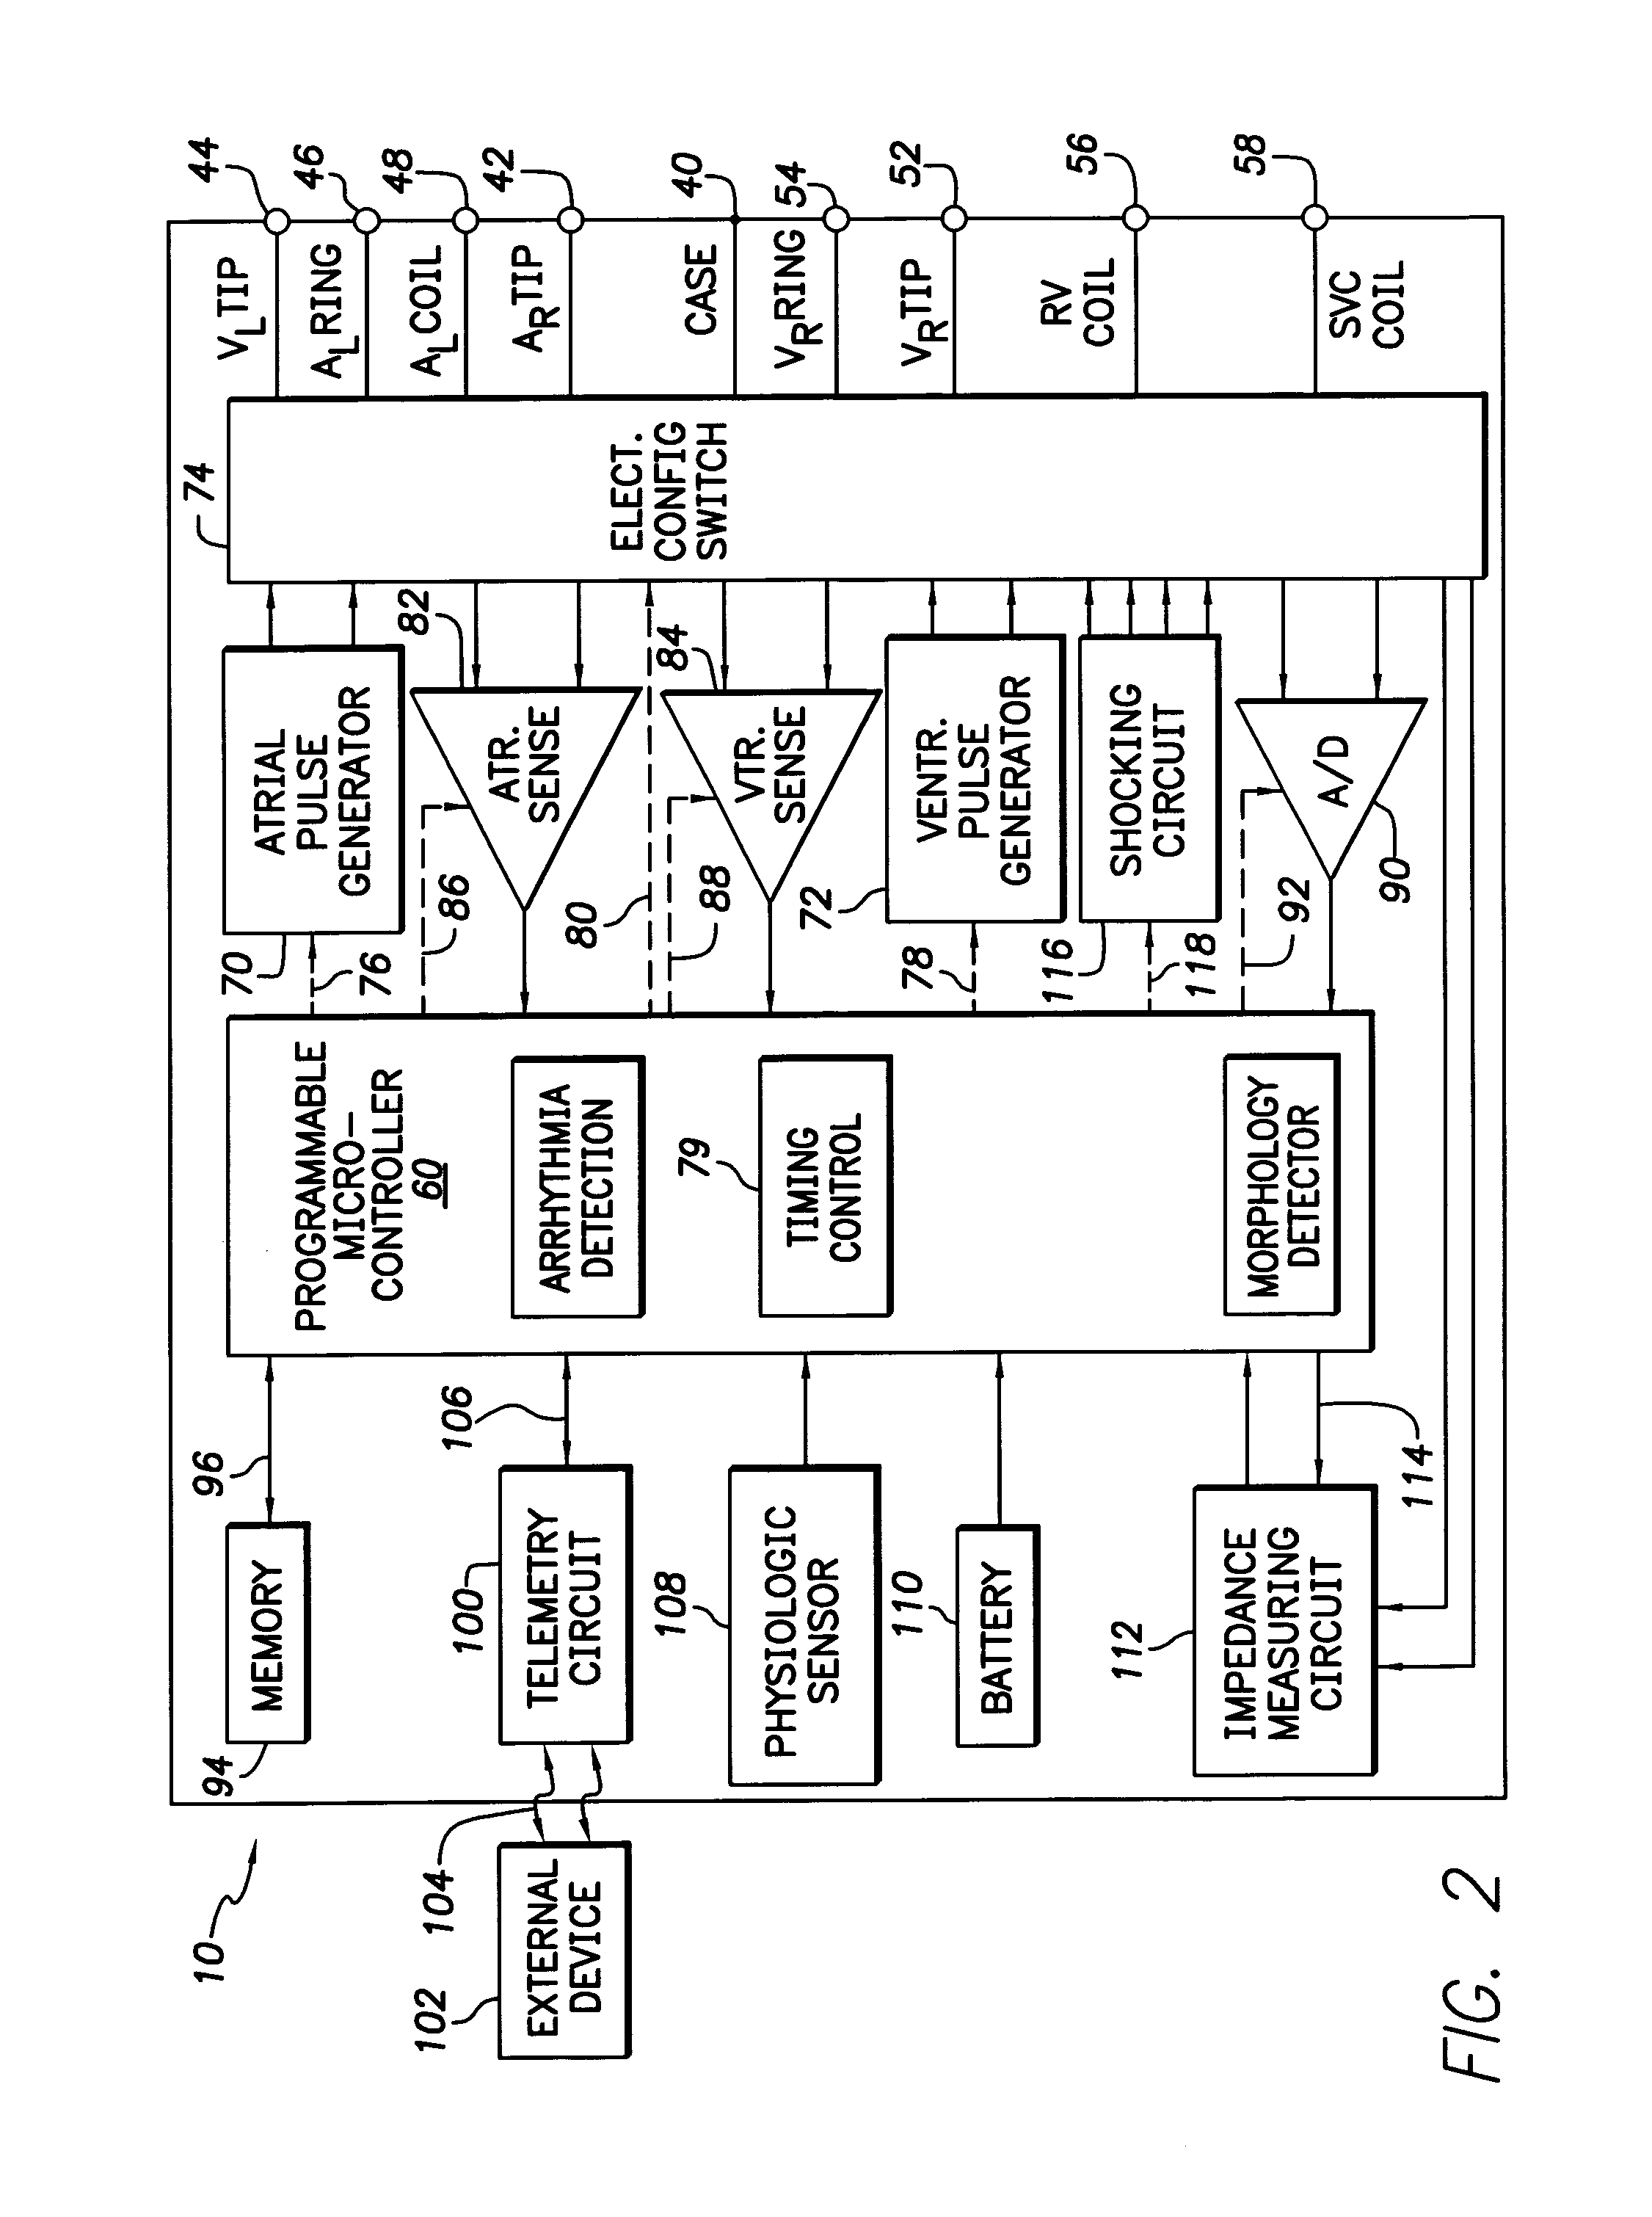 Method and apparatus to backup, update and share data among implantable cardiac stimulation device programmers